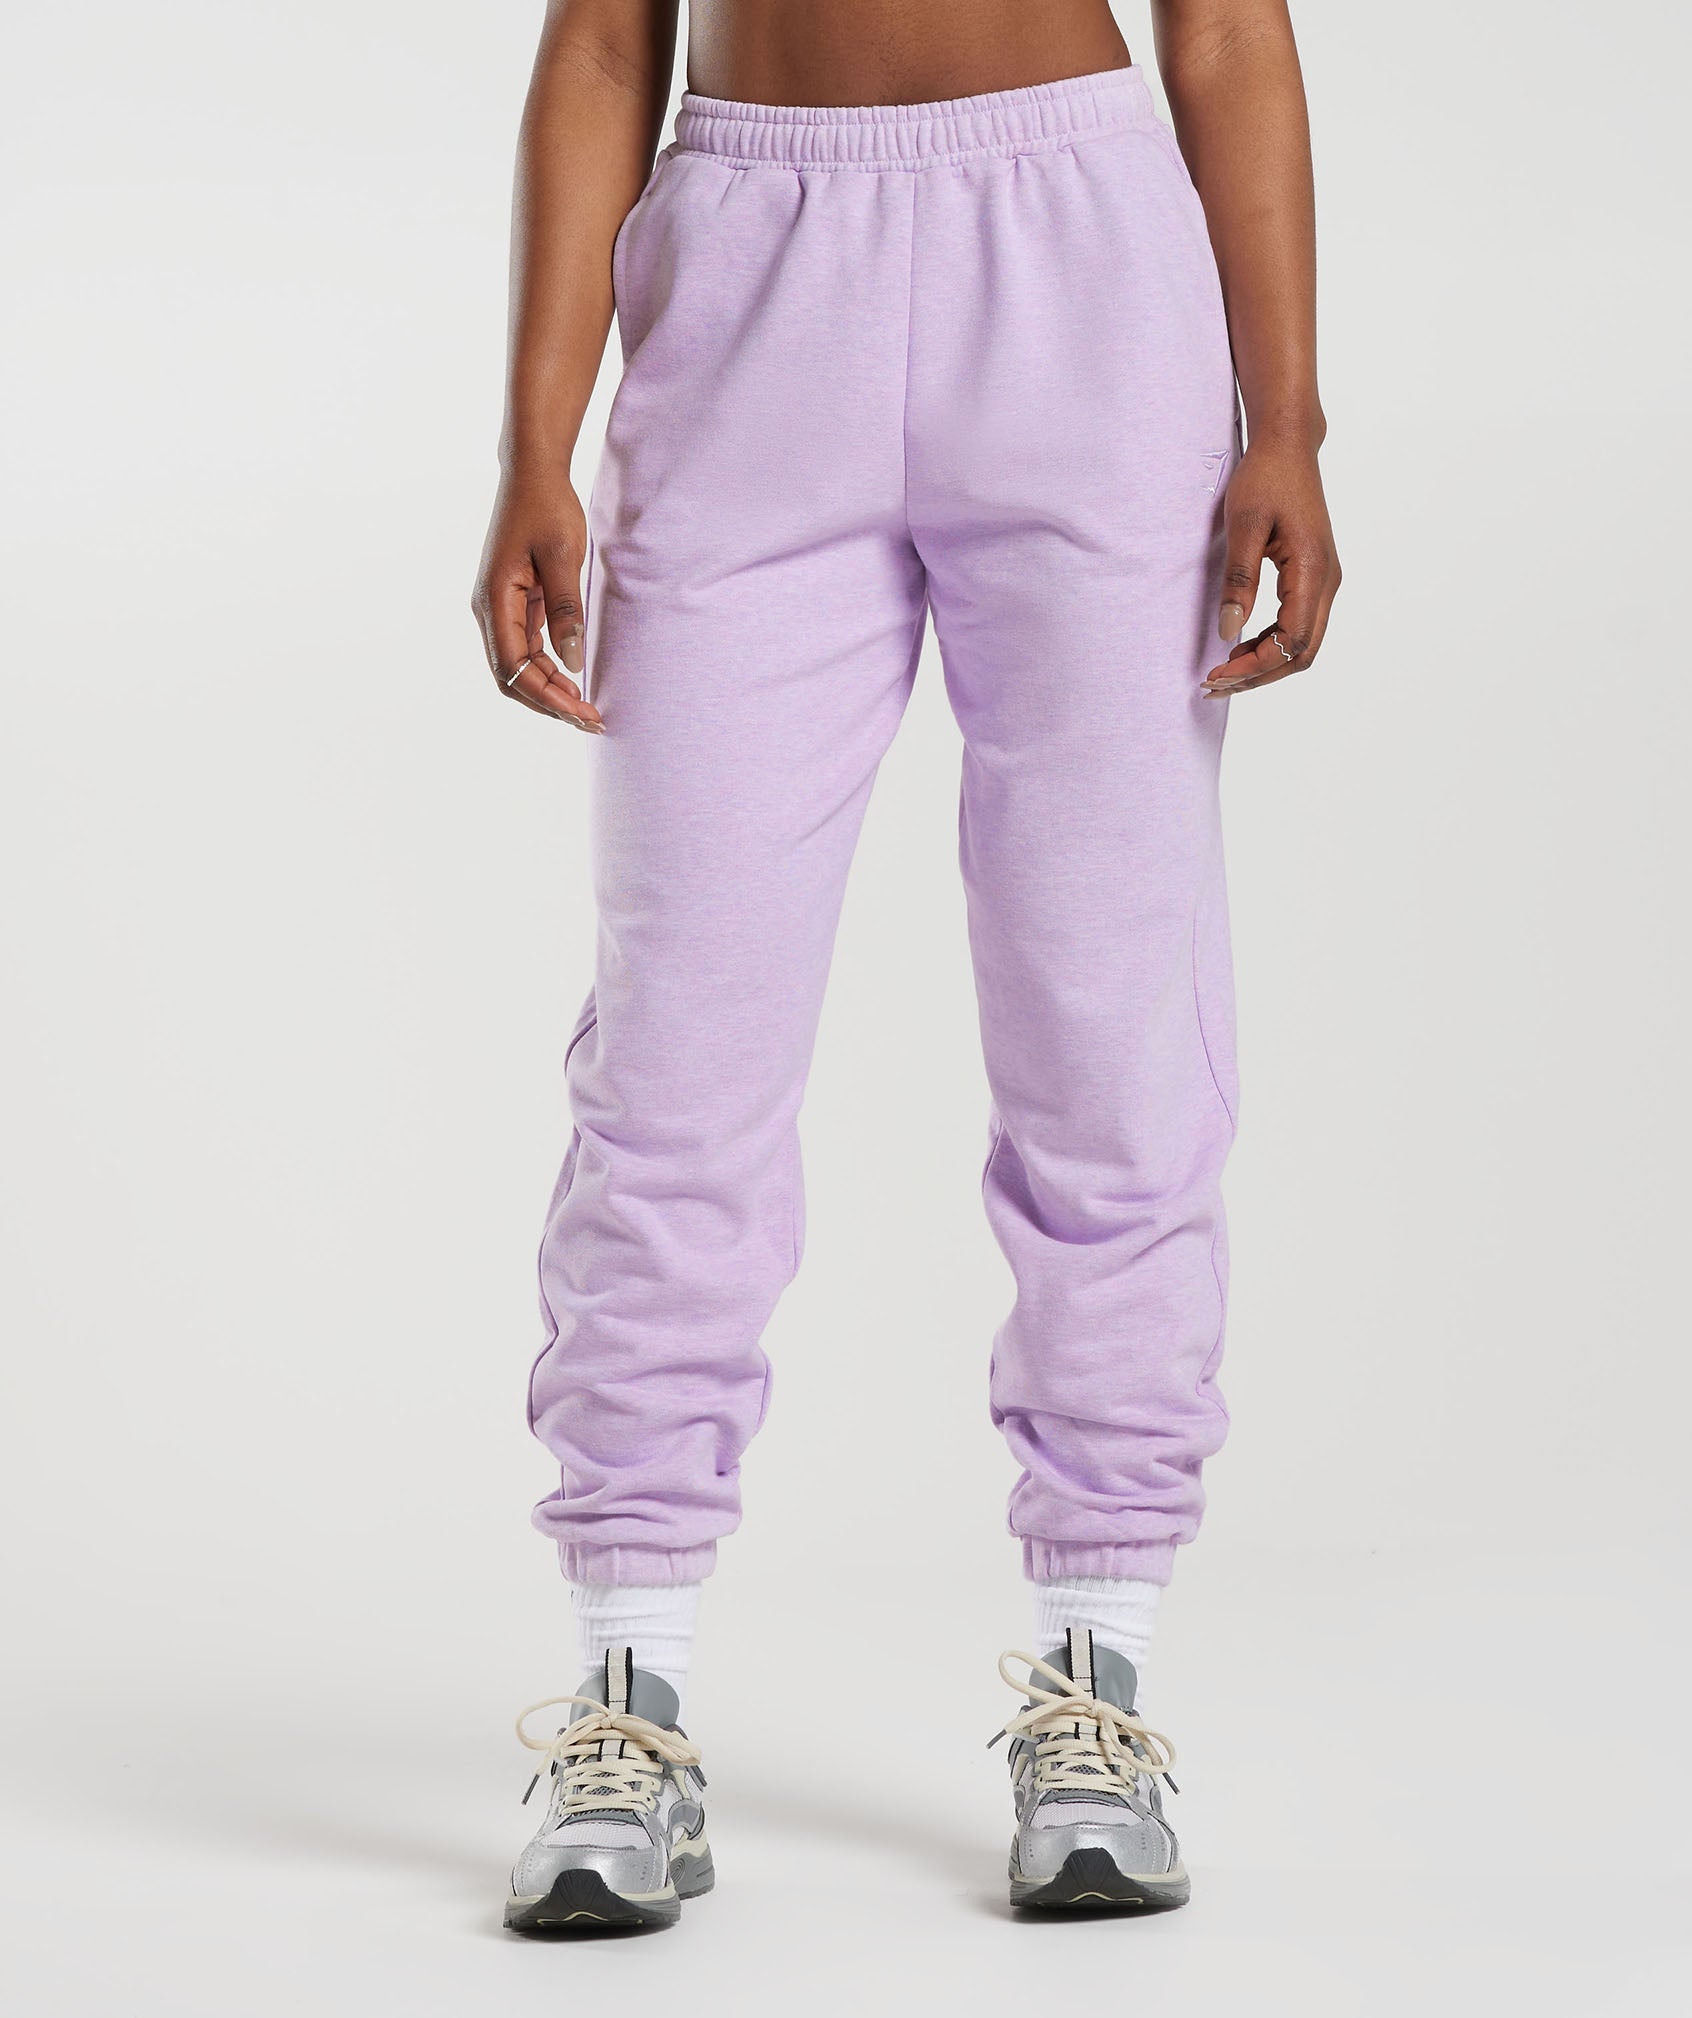 Rest Day Sweats Joggers in Aura Lilac Marl - view 1